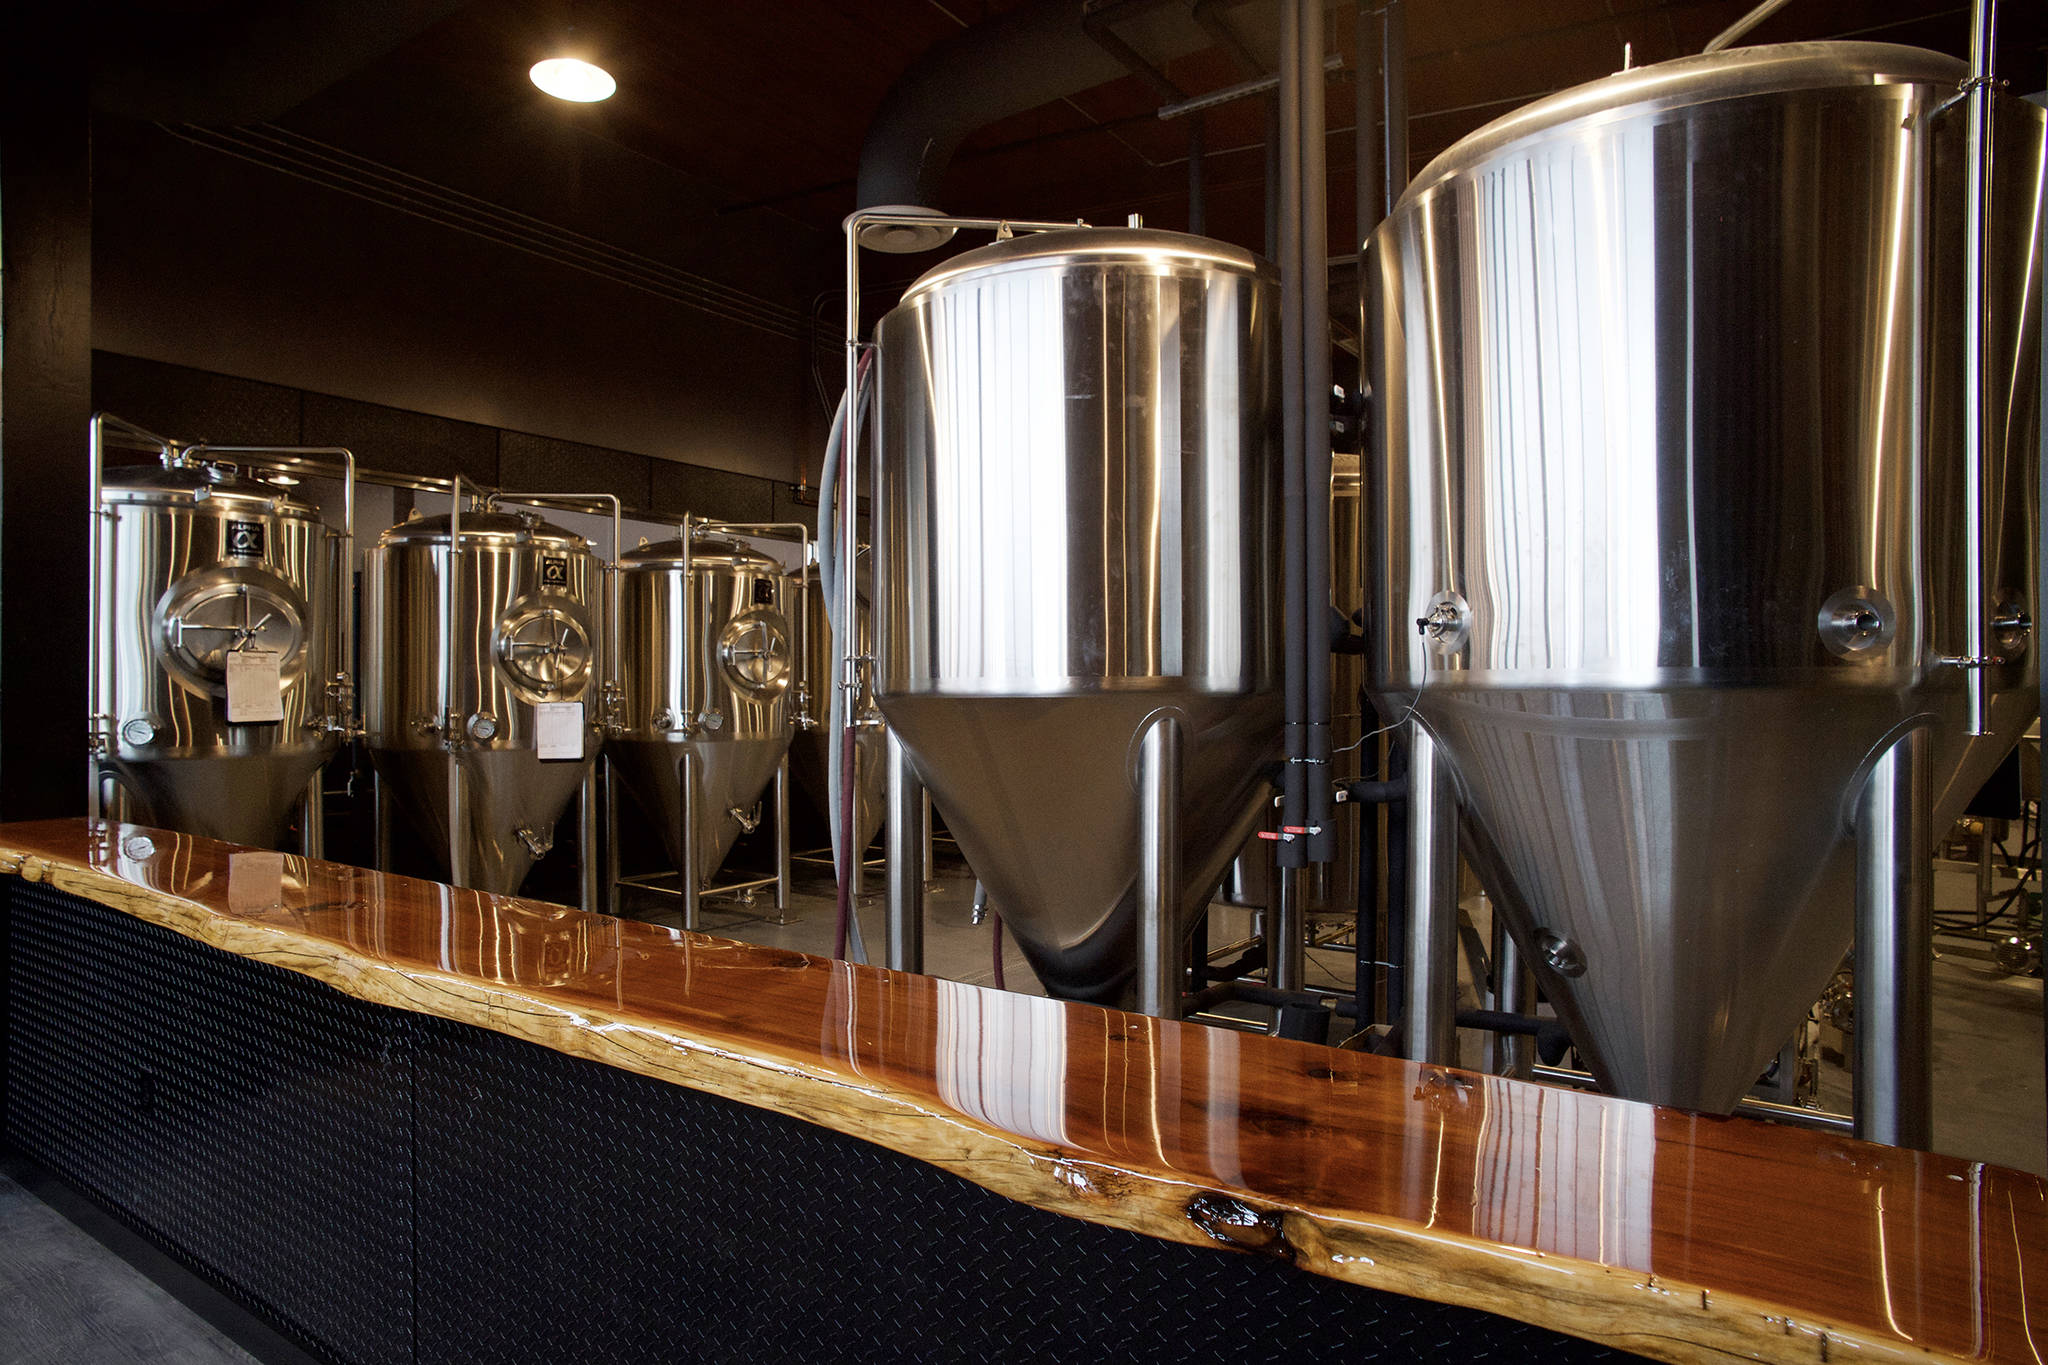 Forbidden Peak Brewery will have 10 different beers to offer from their 10-barrel brewing system when it opens Saturday, Oct. 12. (Michael Penn | Juneau Empire)